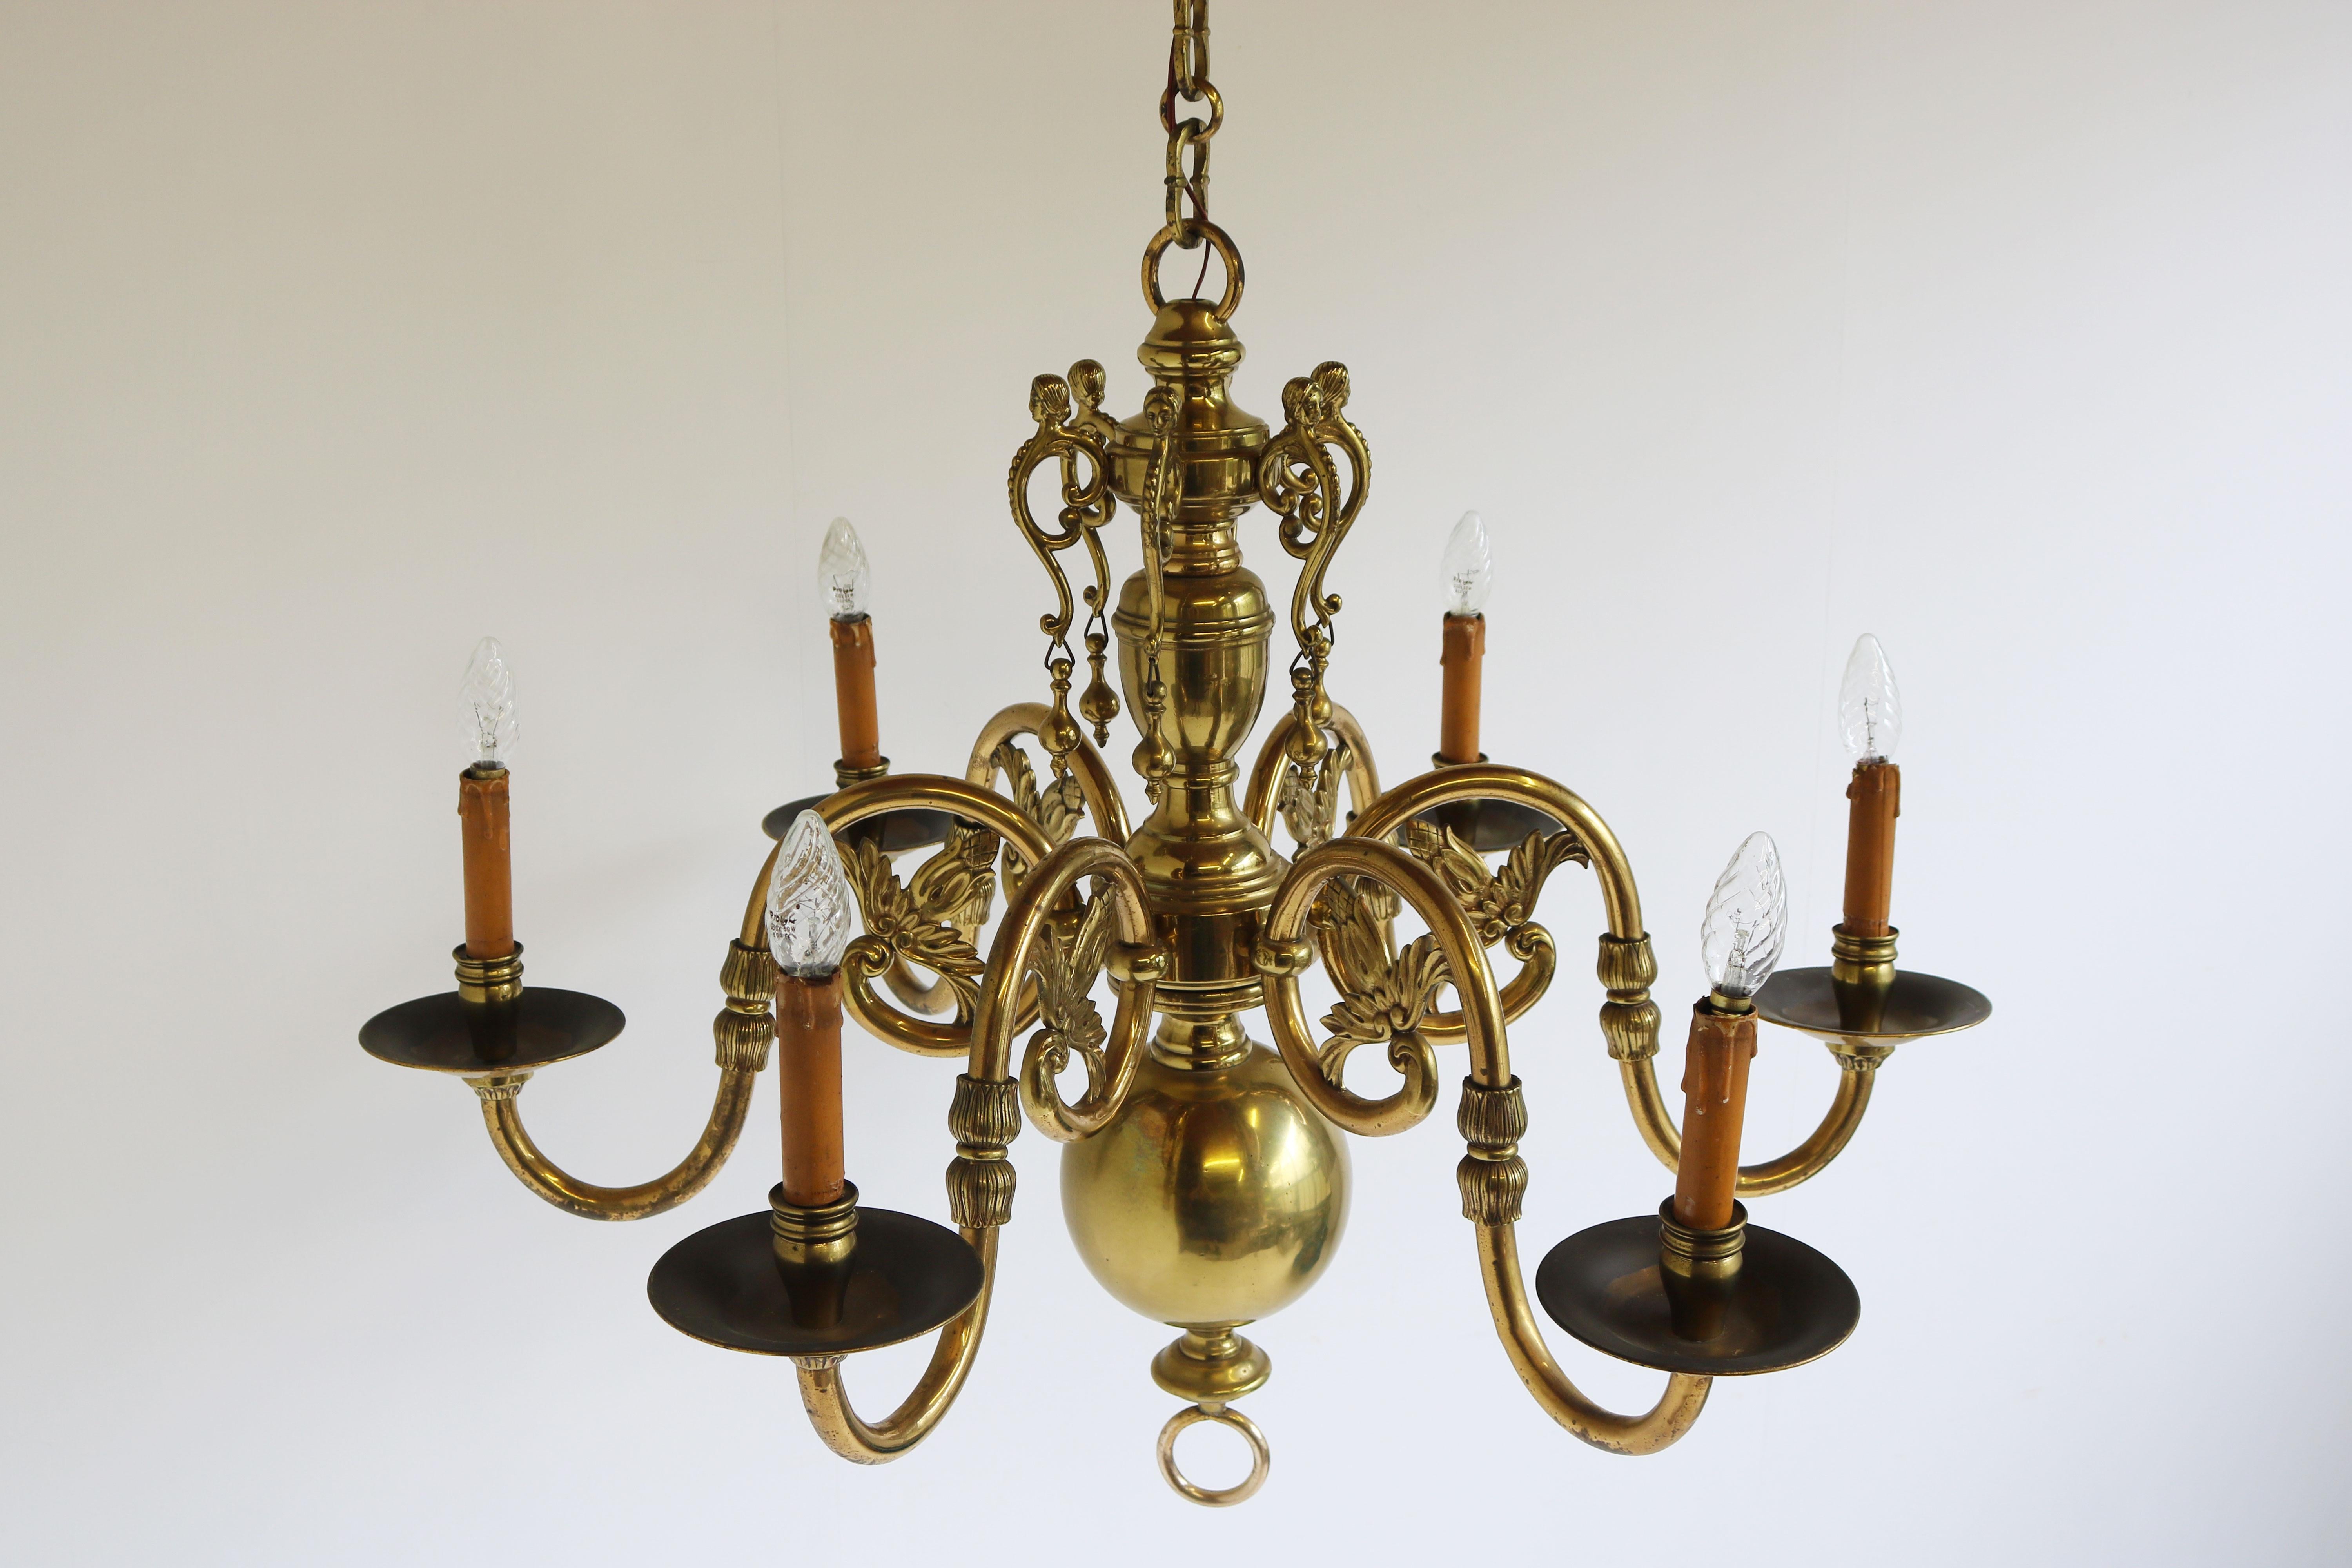 Antique Flemish Chandelier Georgian Style 19th Century Solid Brass Classic Lamp For Sale 5